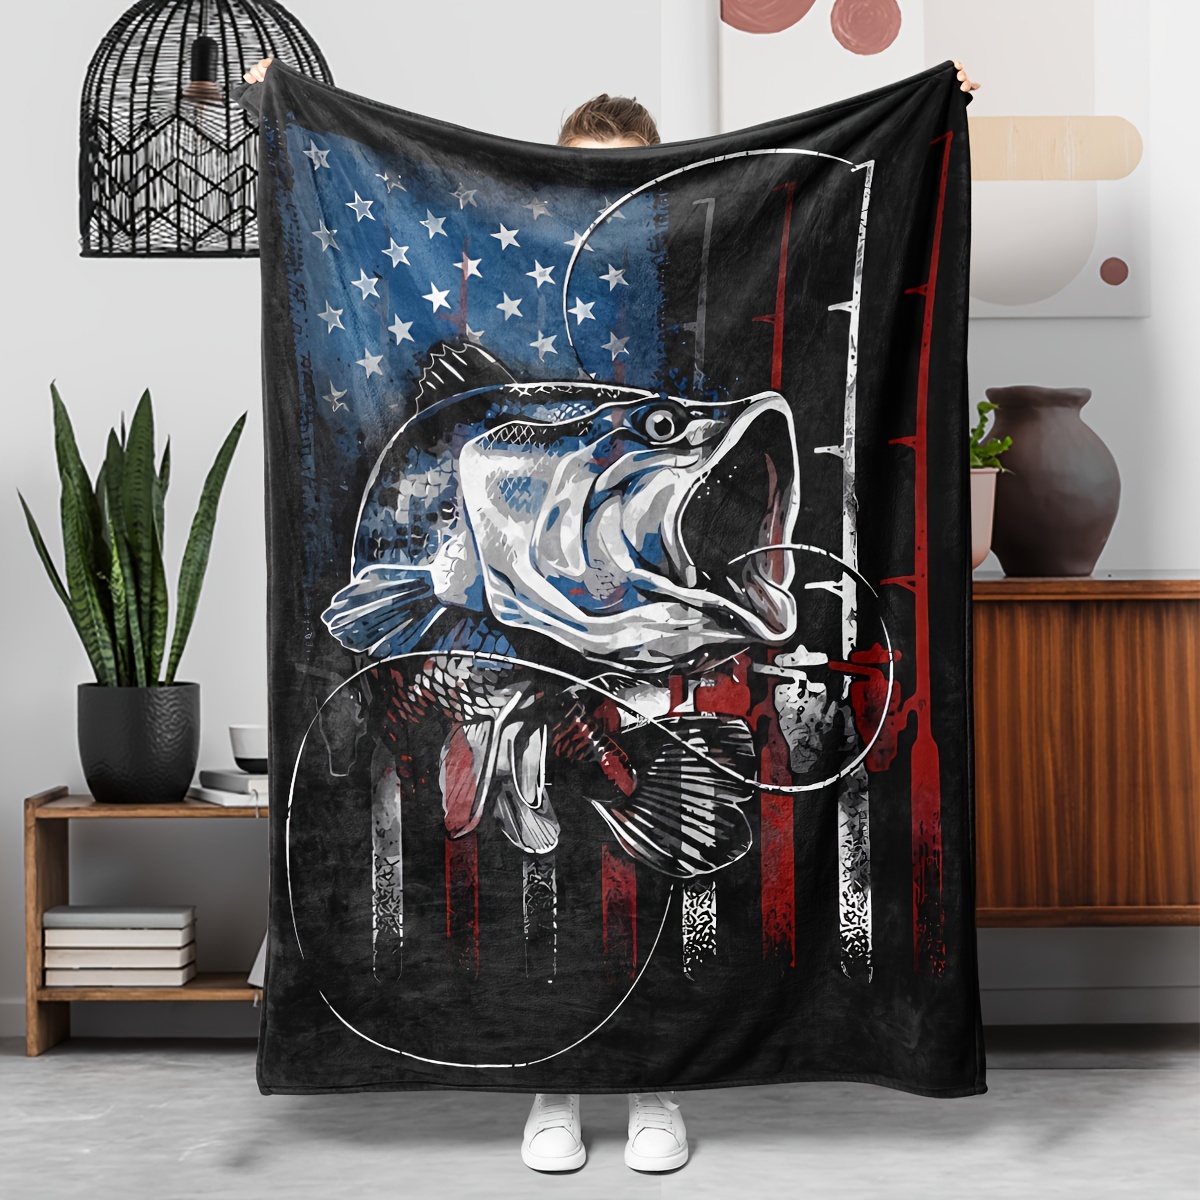  Christmas Fishing Gifts For Men, Fishing Gifts, Funny  Fishing Gifts For Boys, Fishing Gifts For Women Unique,Fishing Gift, Best  Gifts For Fisherman, Gifts For Men Who Love Fishing Blanket 50X60